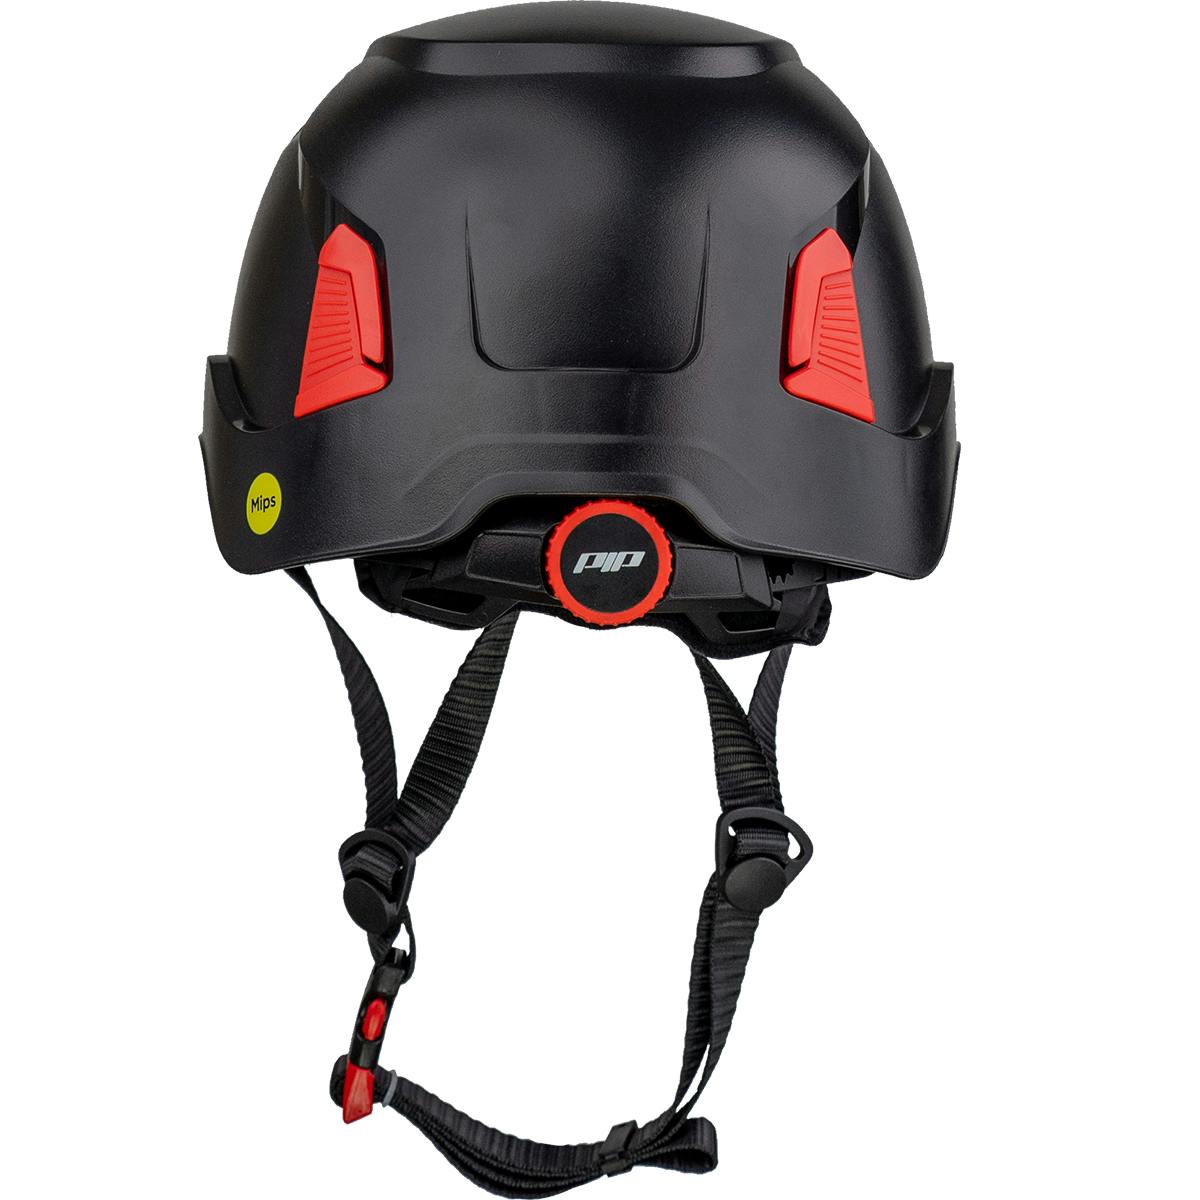 Traverse™ Industrial Climbing Helmet with Mips® Technology, ABS Shell, EPS Foam Impact Liner, HDPE Suspension, Wheel Ratchet Adjustment and 4-Point Chin Strap (280-HP1491RM)